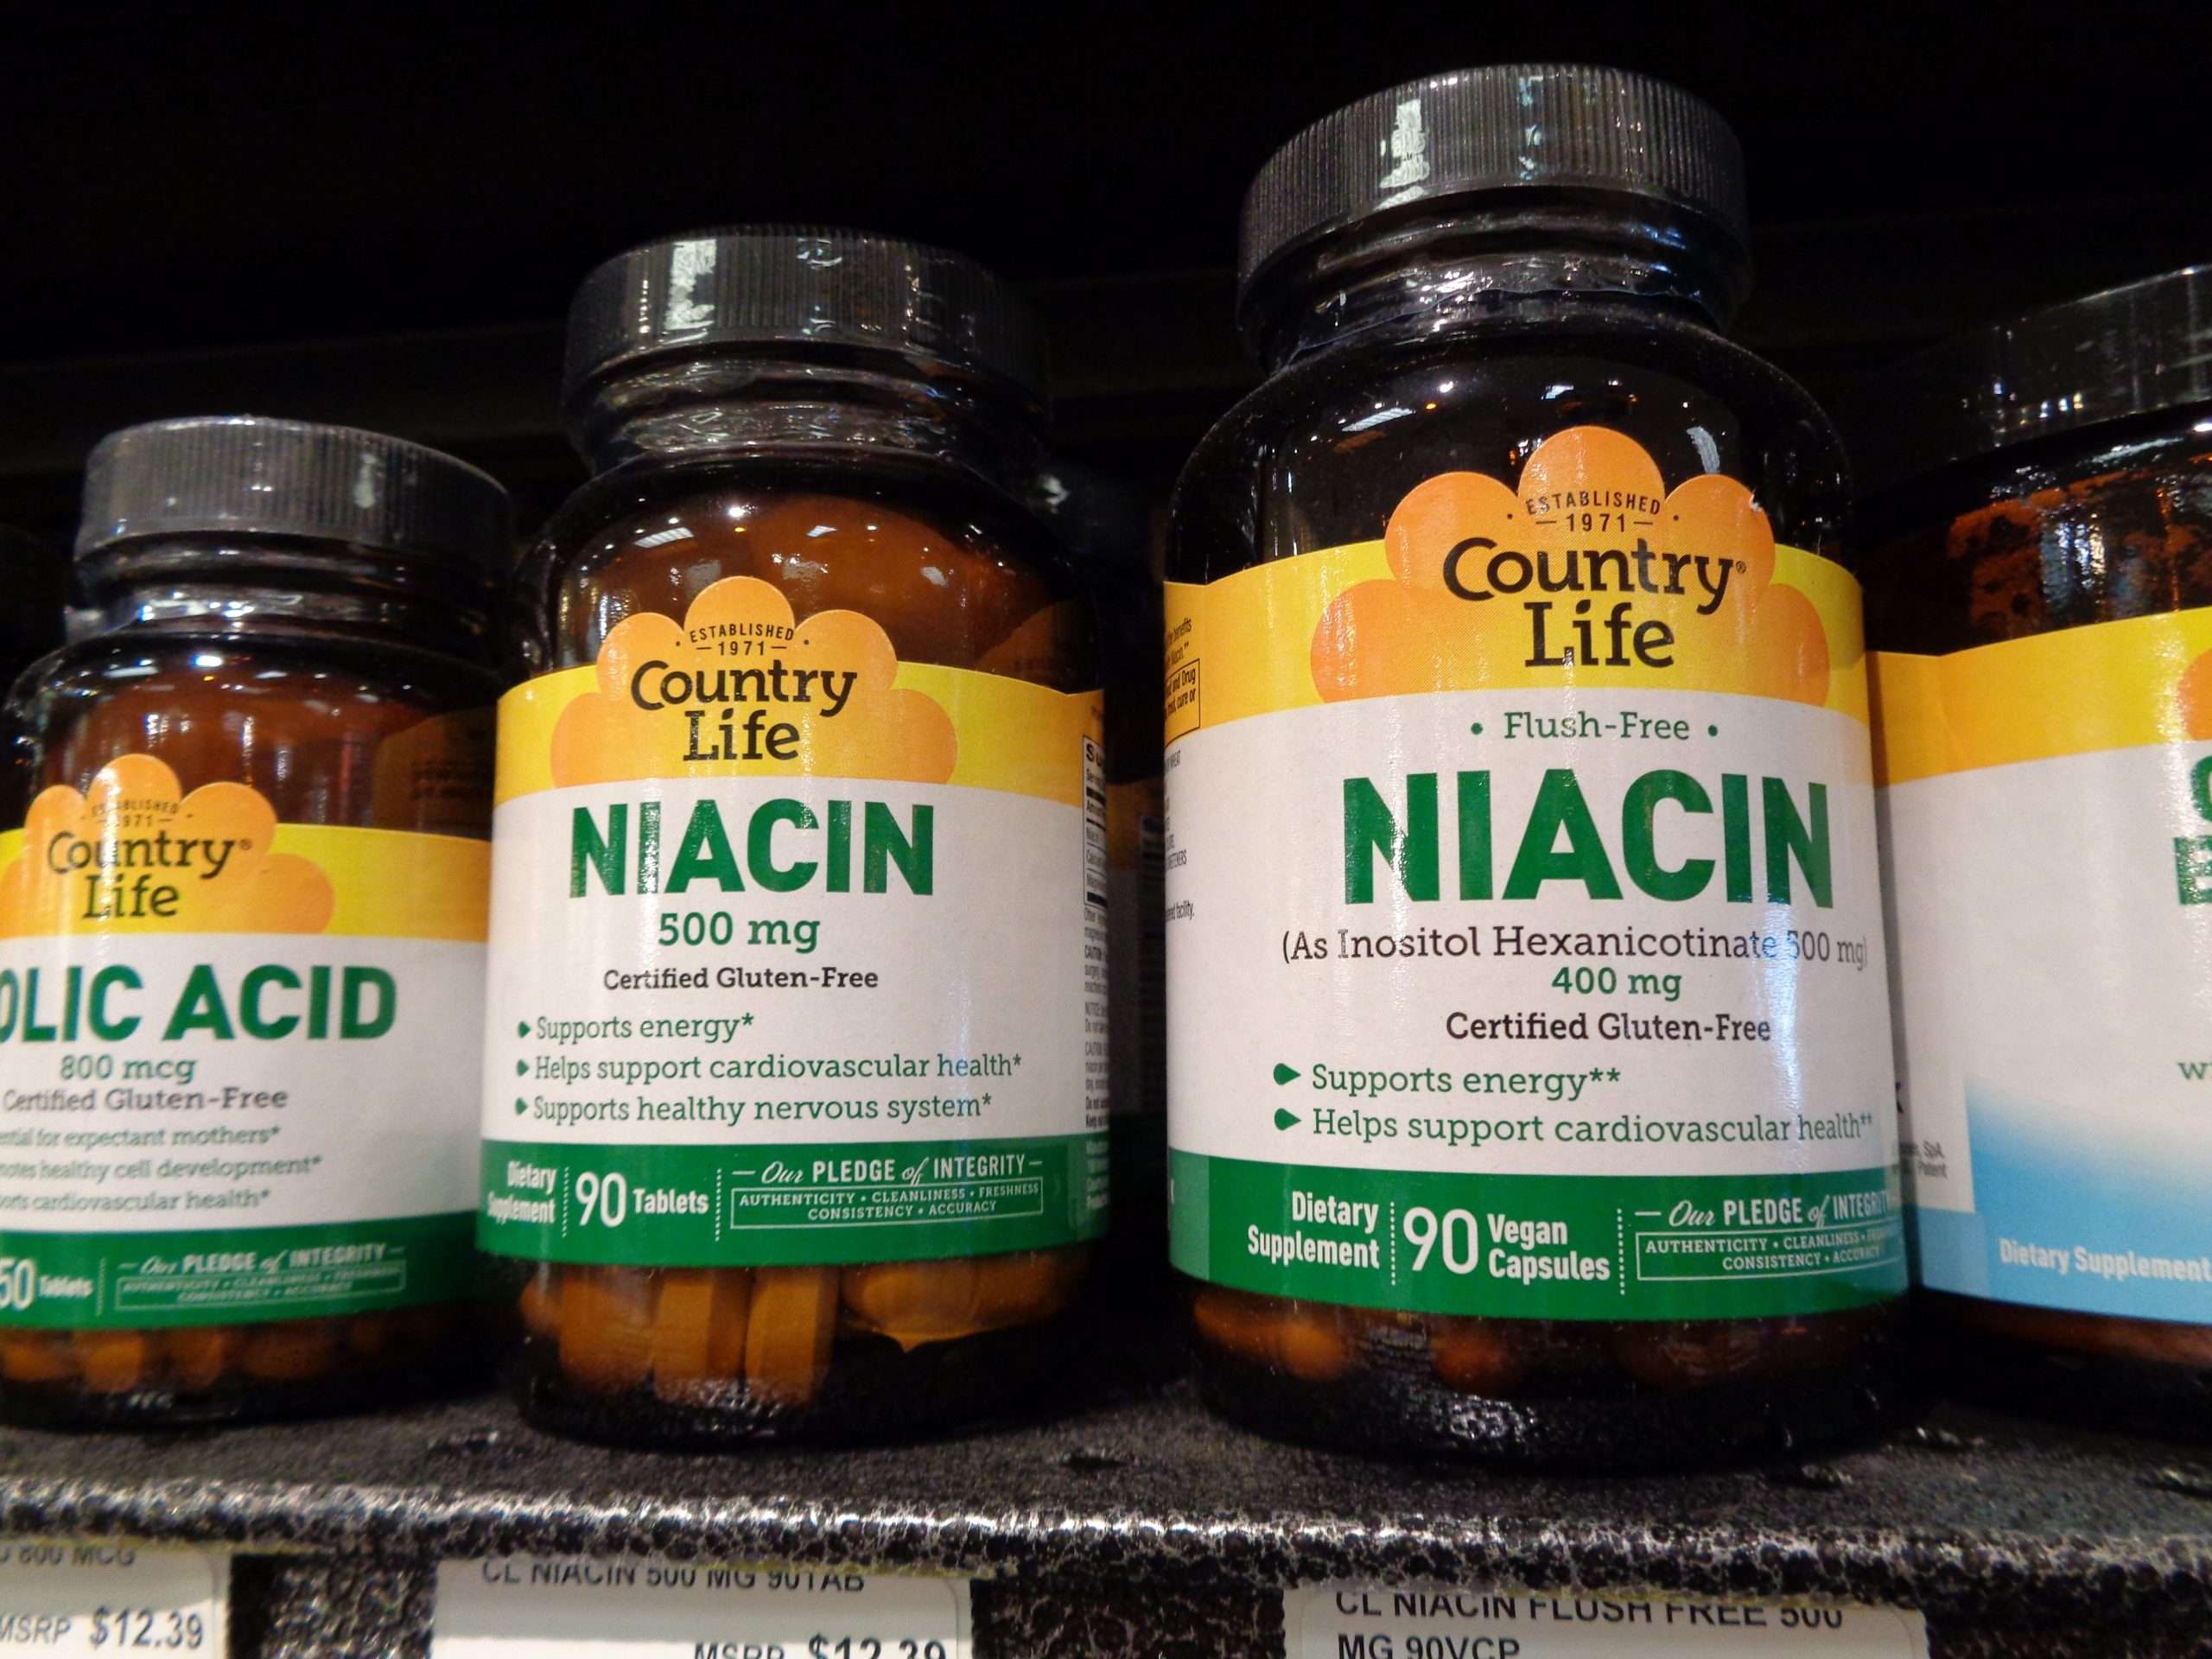 Check out Niacin supplements if you want to lower your cholesterol ...